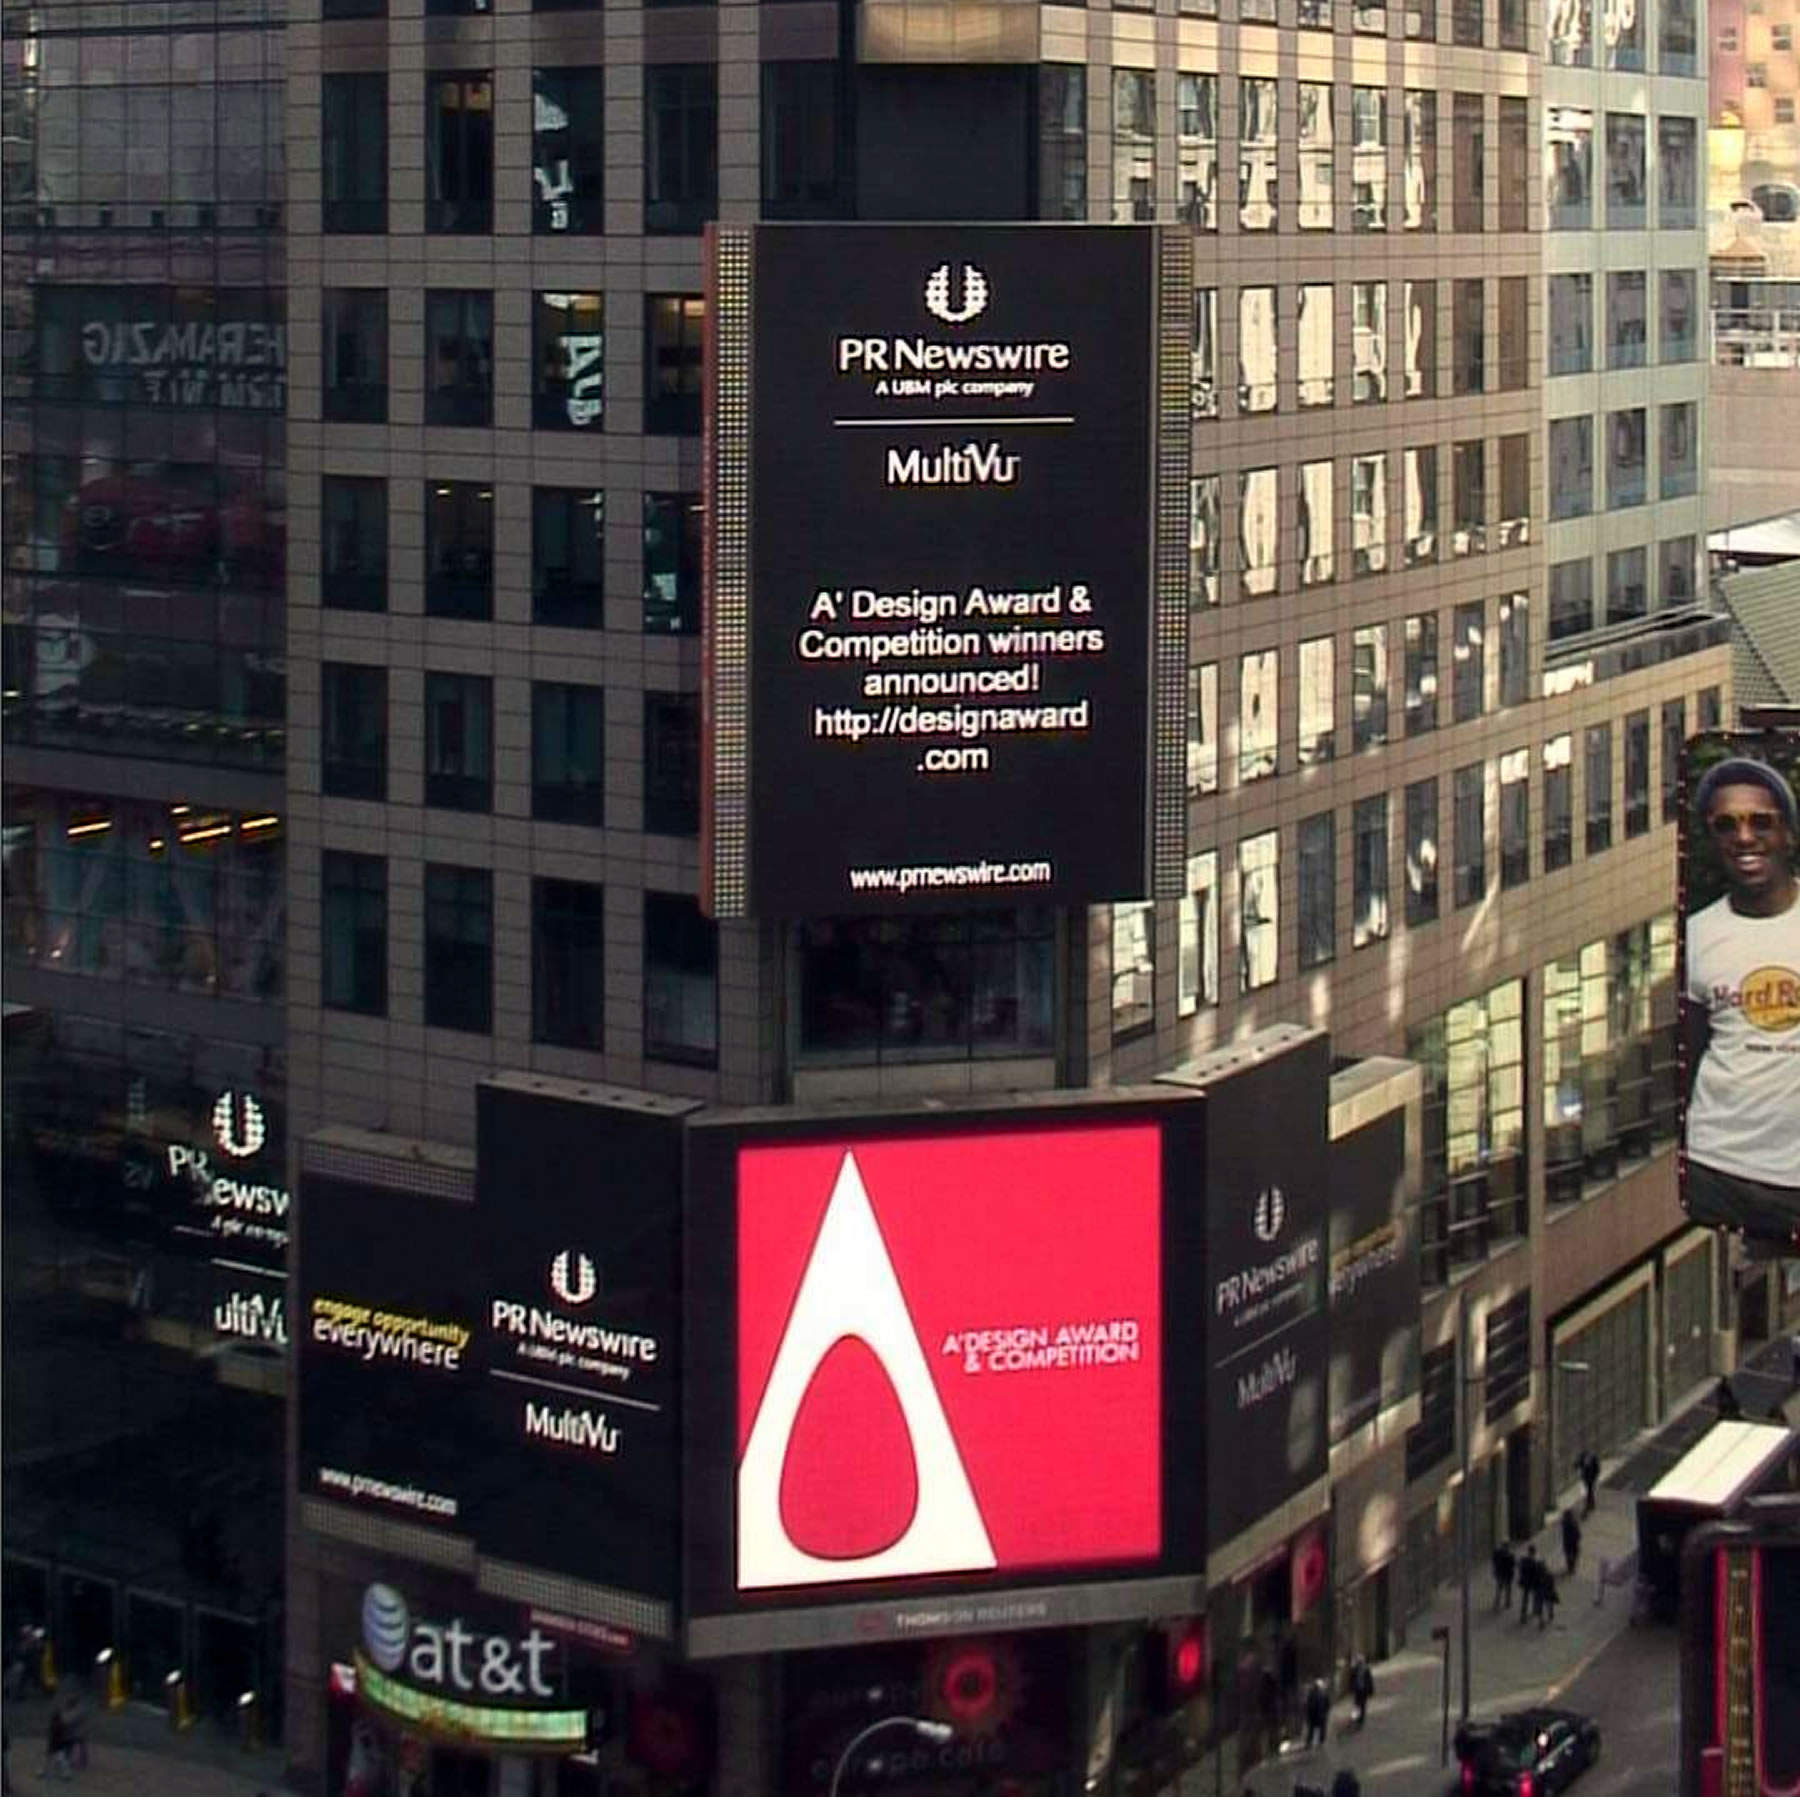 Design award promotion in New York Times Square